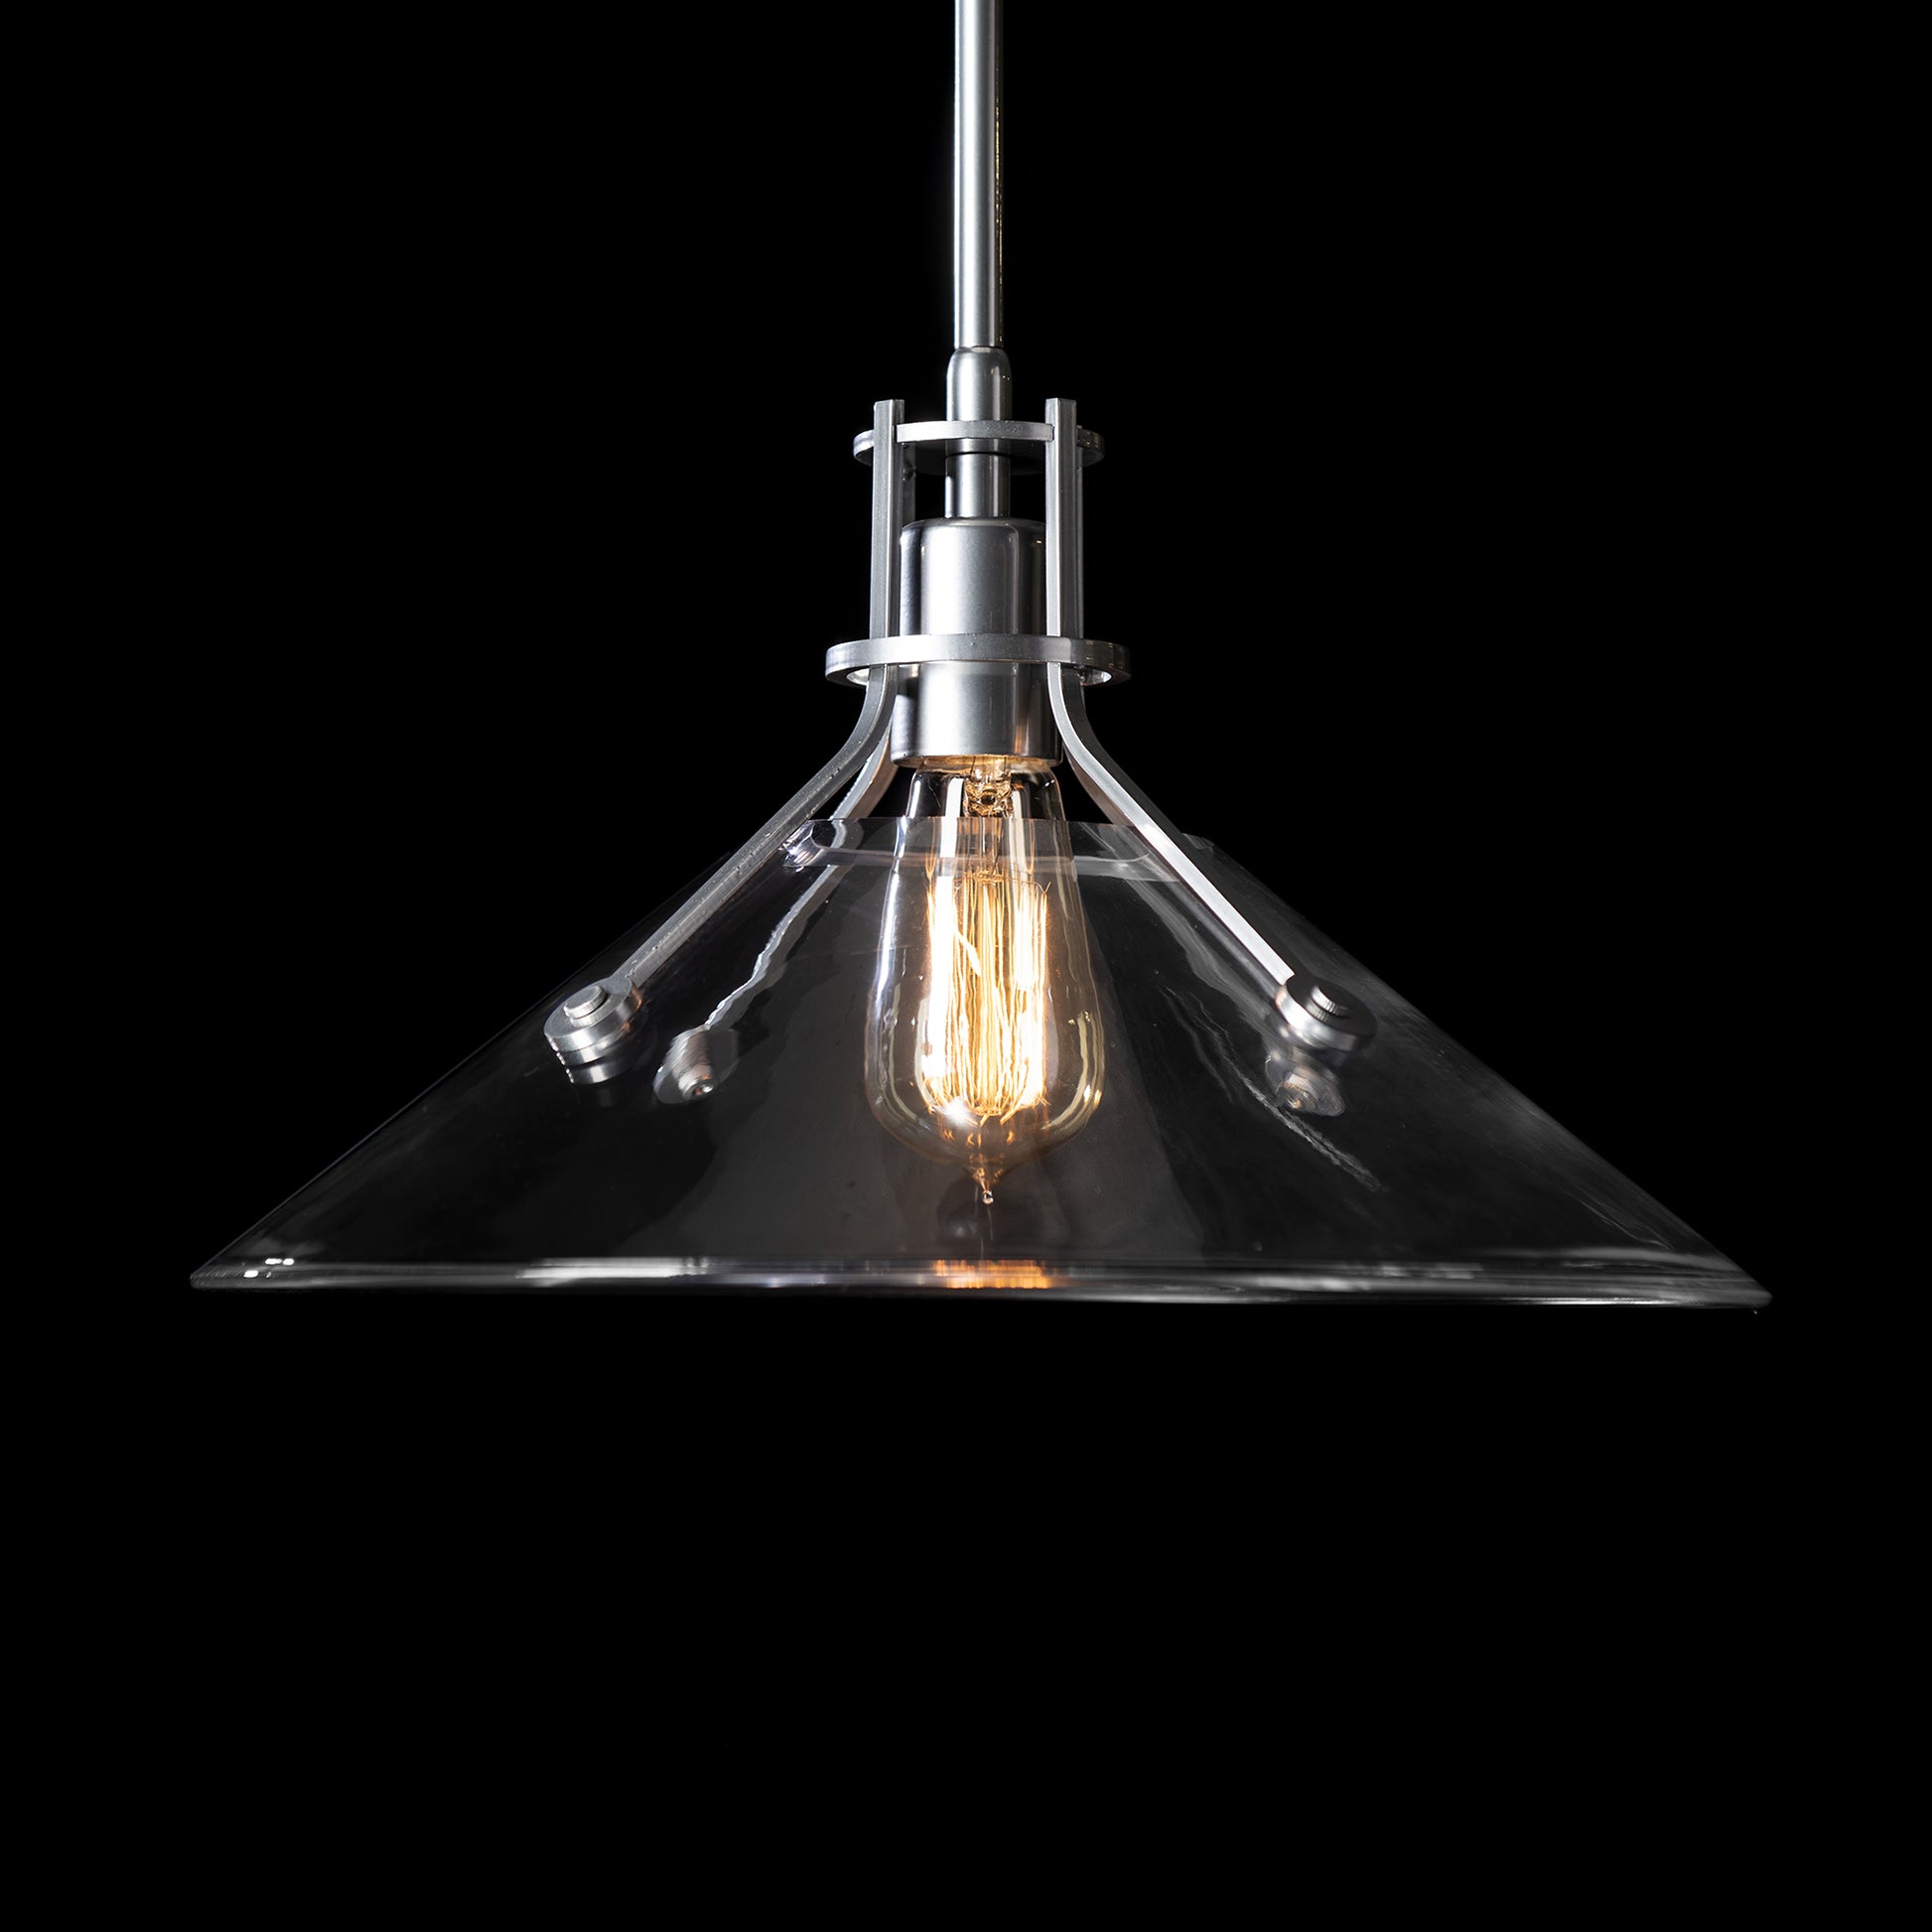 A Hubbardton Forge Henry Medium Glass Shade Pendant with a black background featuring a glass shade and modern industrial styling.